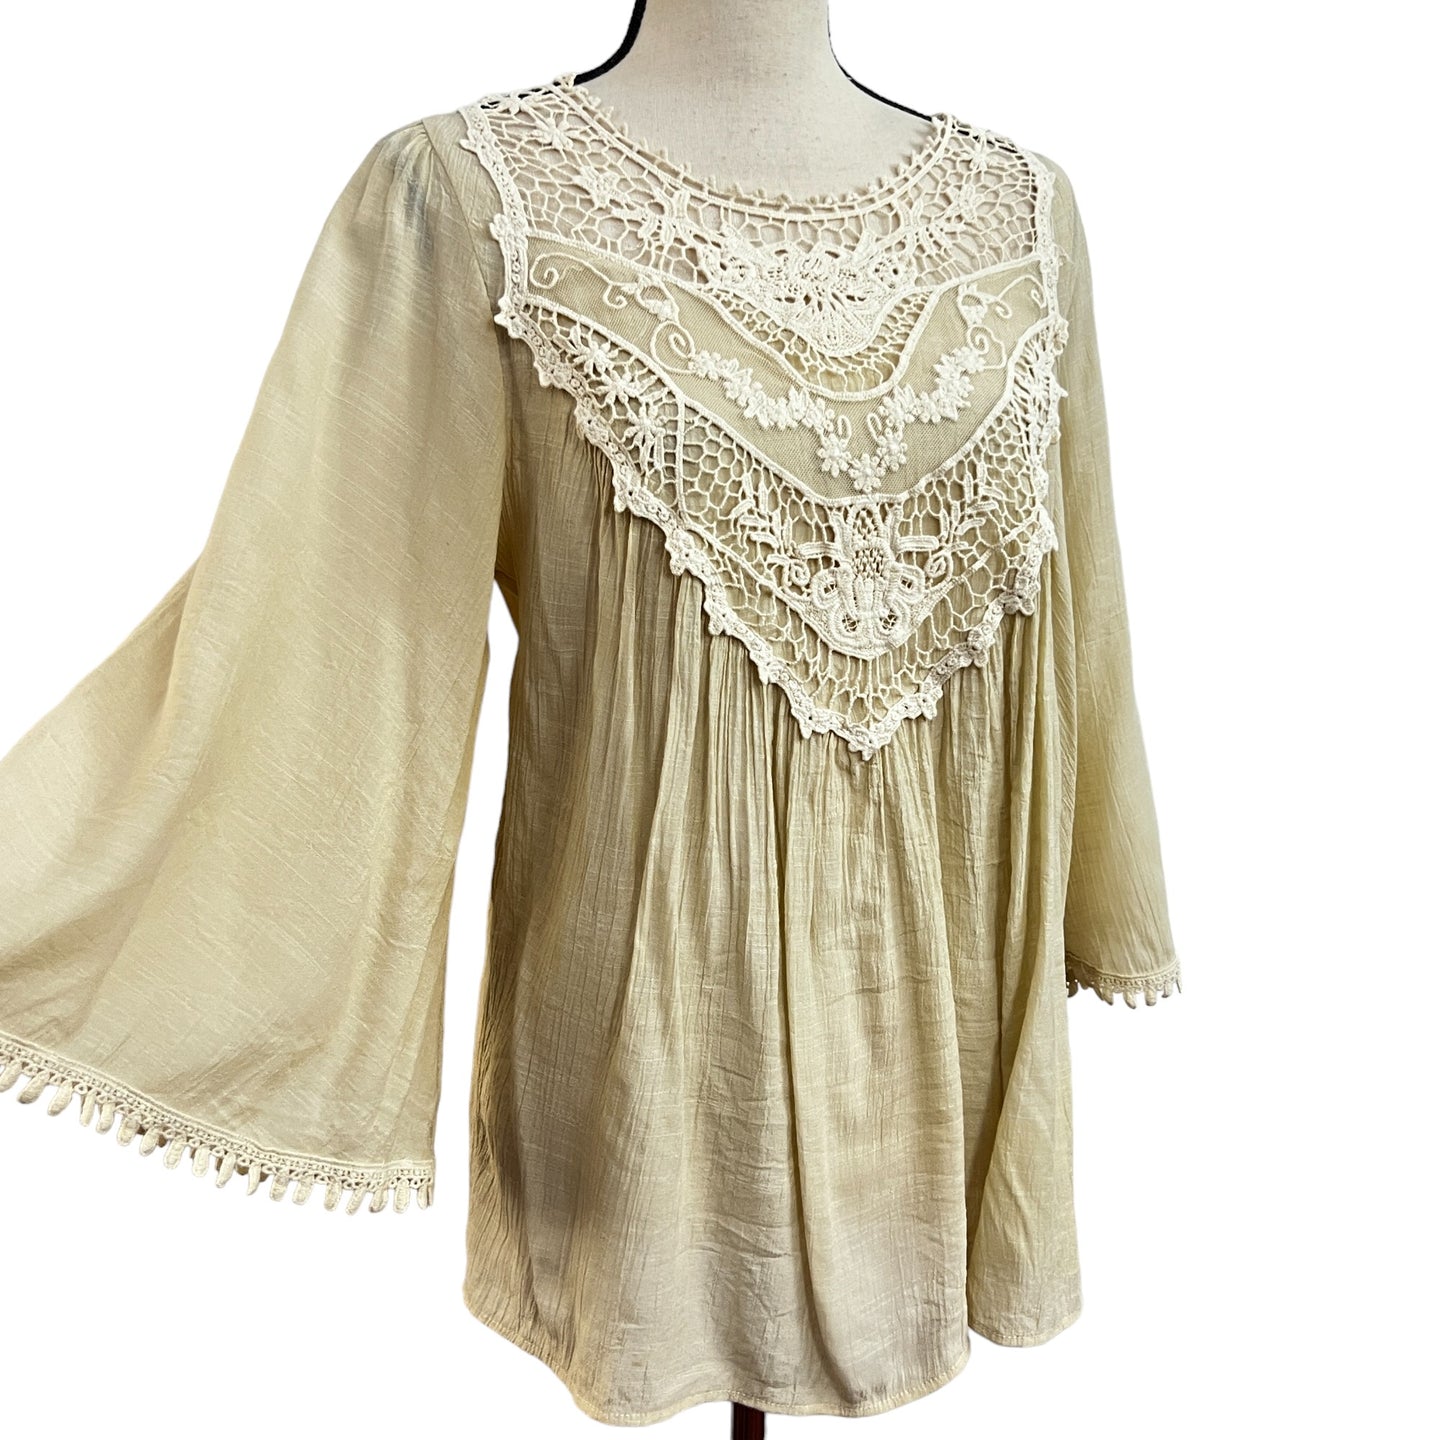 Embroidered Boho Style Long Sleeves Top Size Small